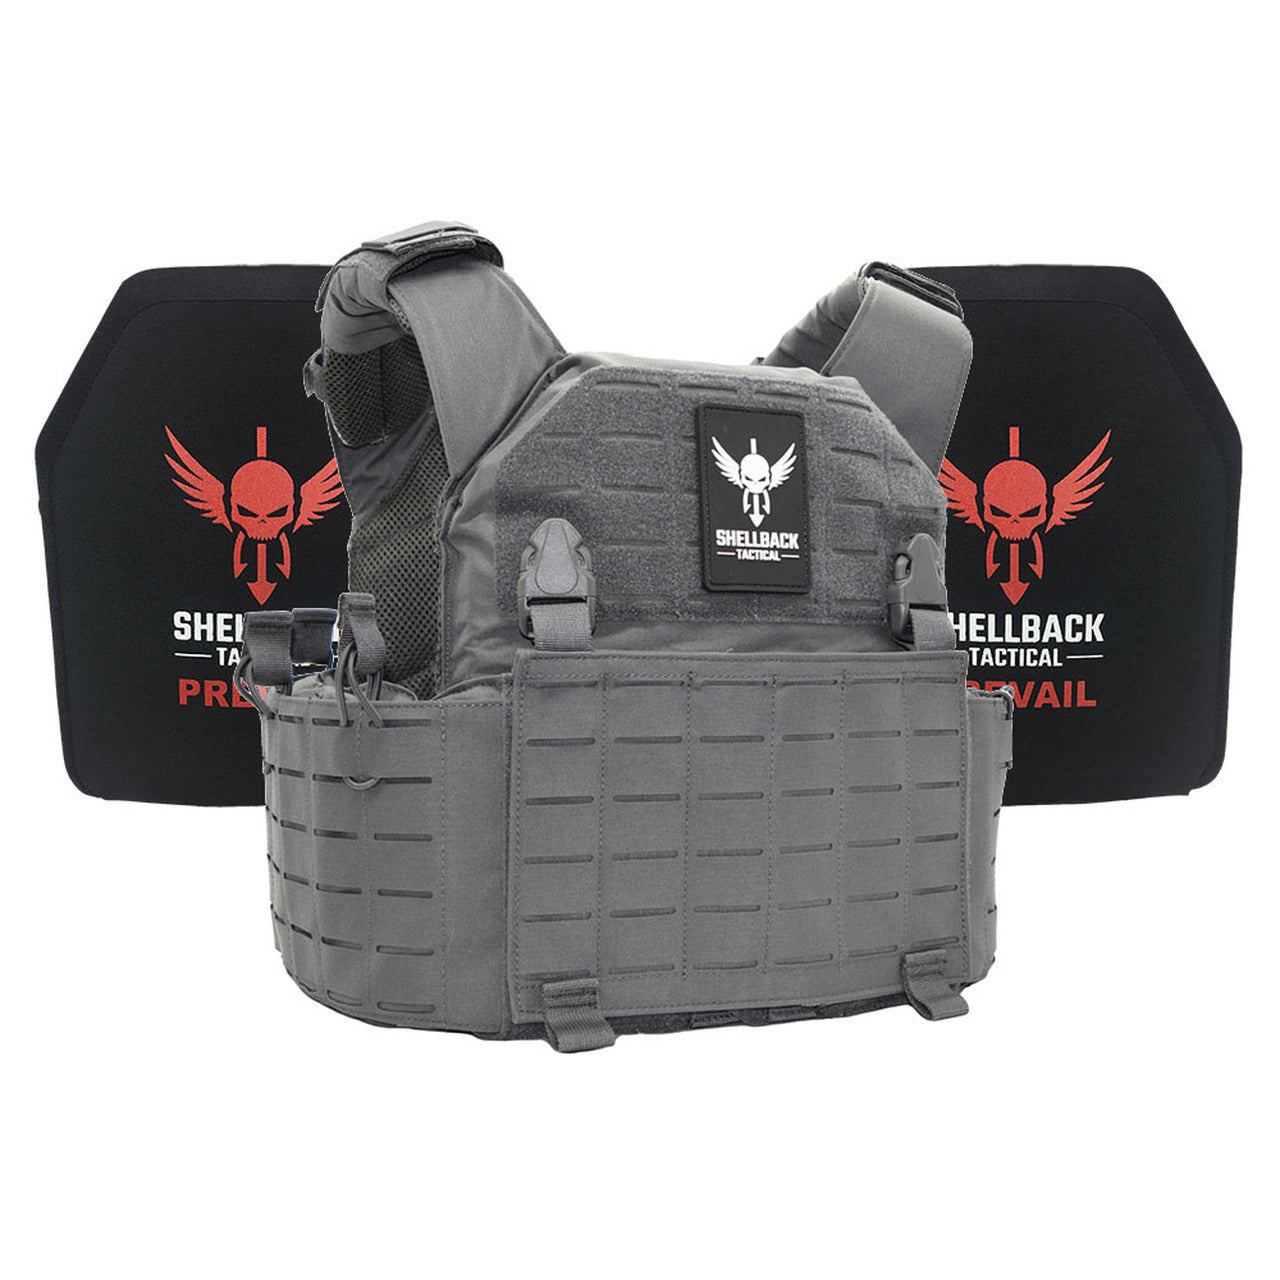 A Shellback Tactical Rampage 2.0 Active Shooter Kit with Level III Single Curve 10 x 12 Hard Armor plate carrier with a red and black design.